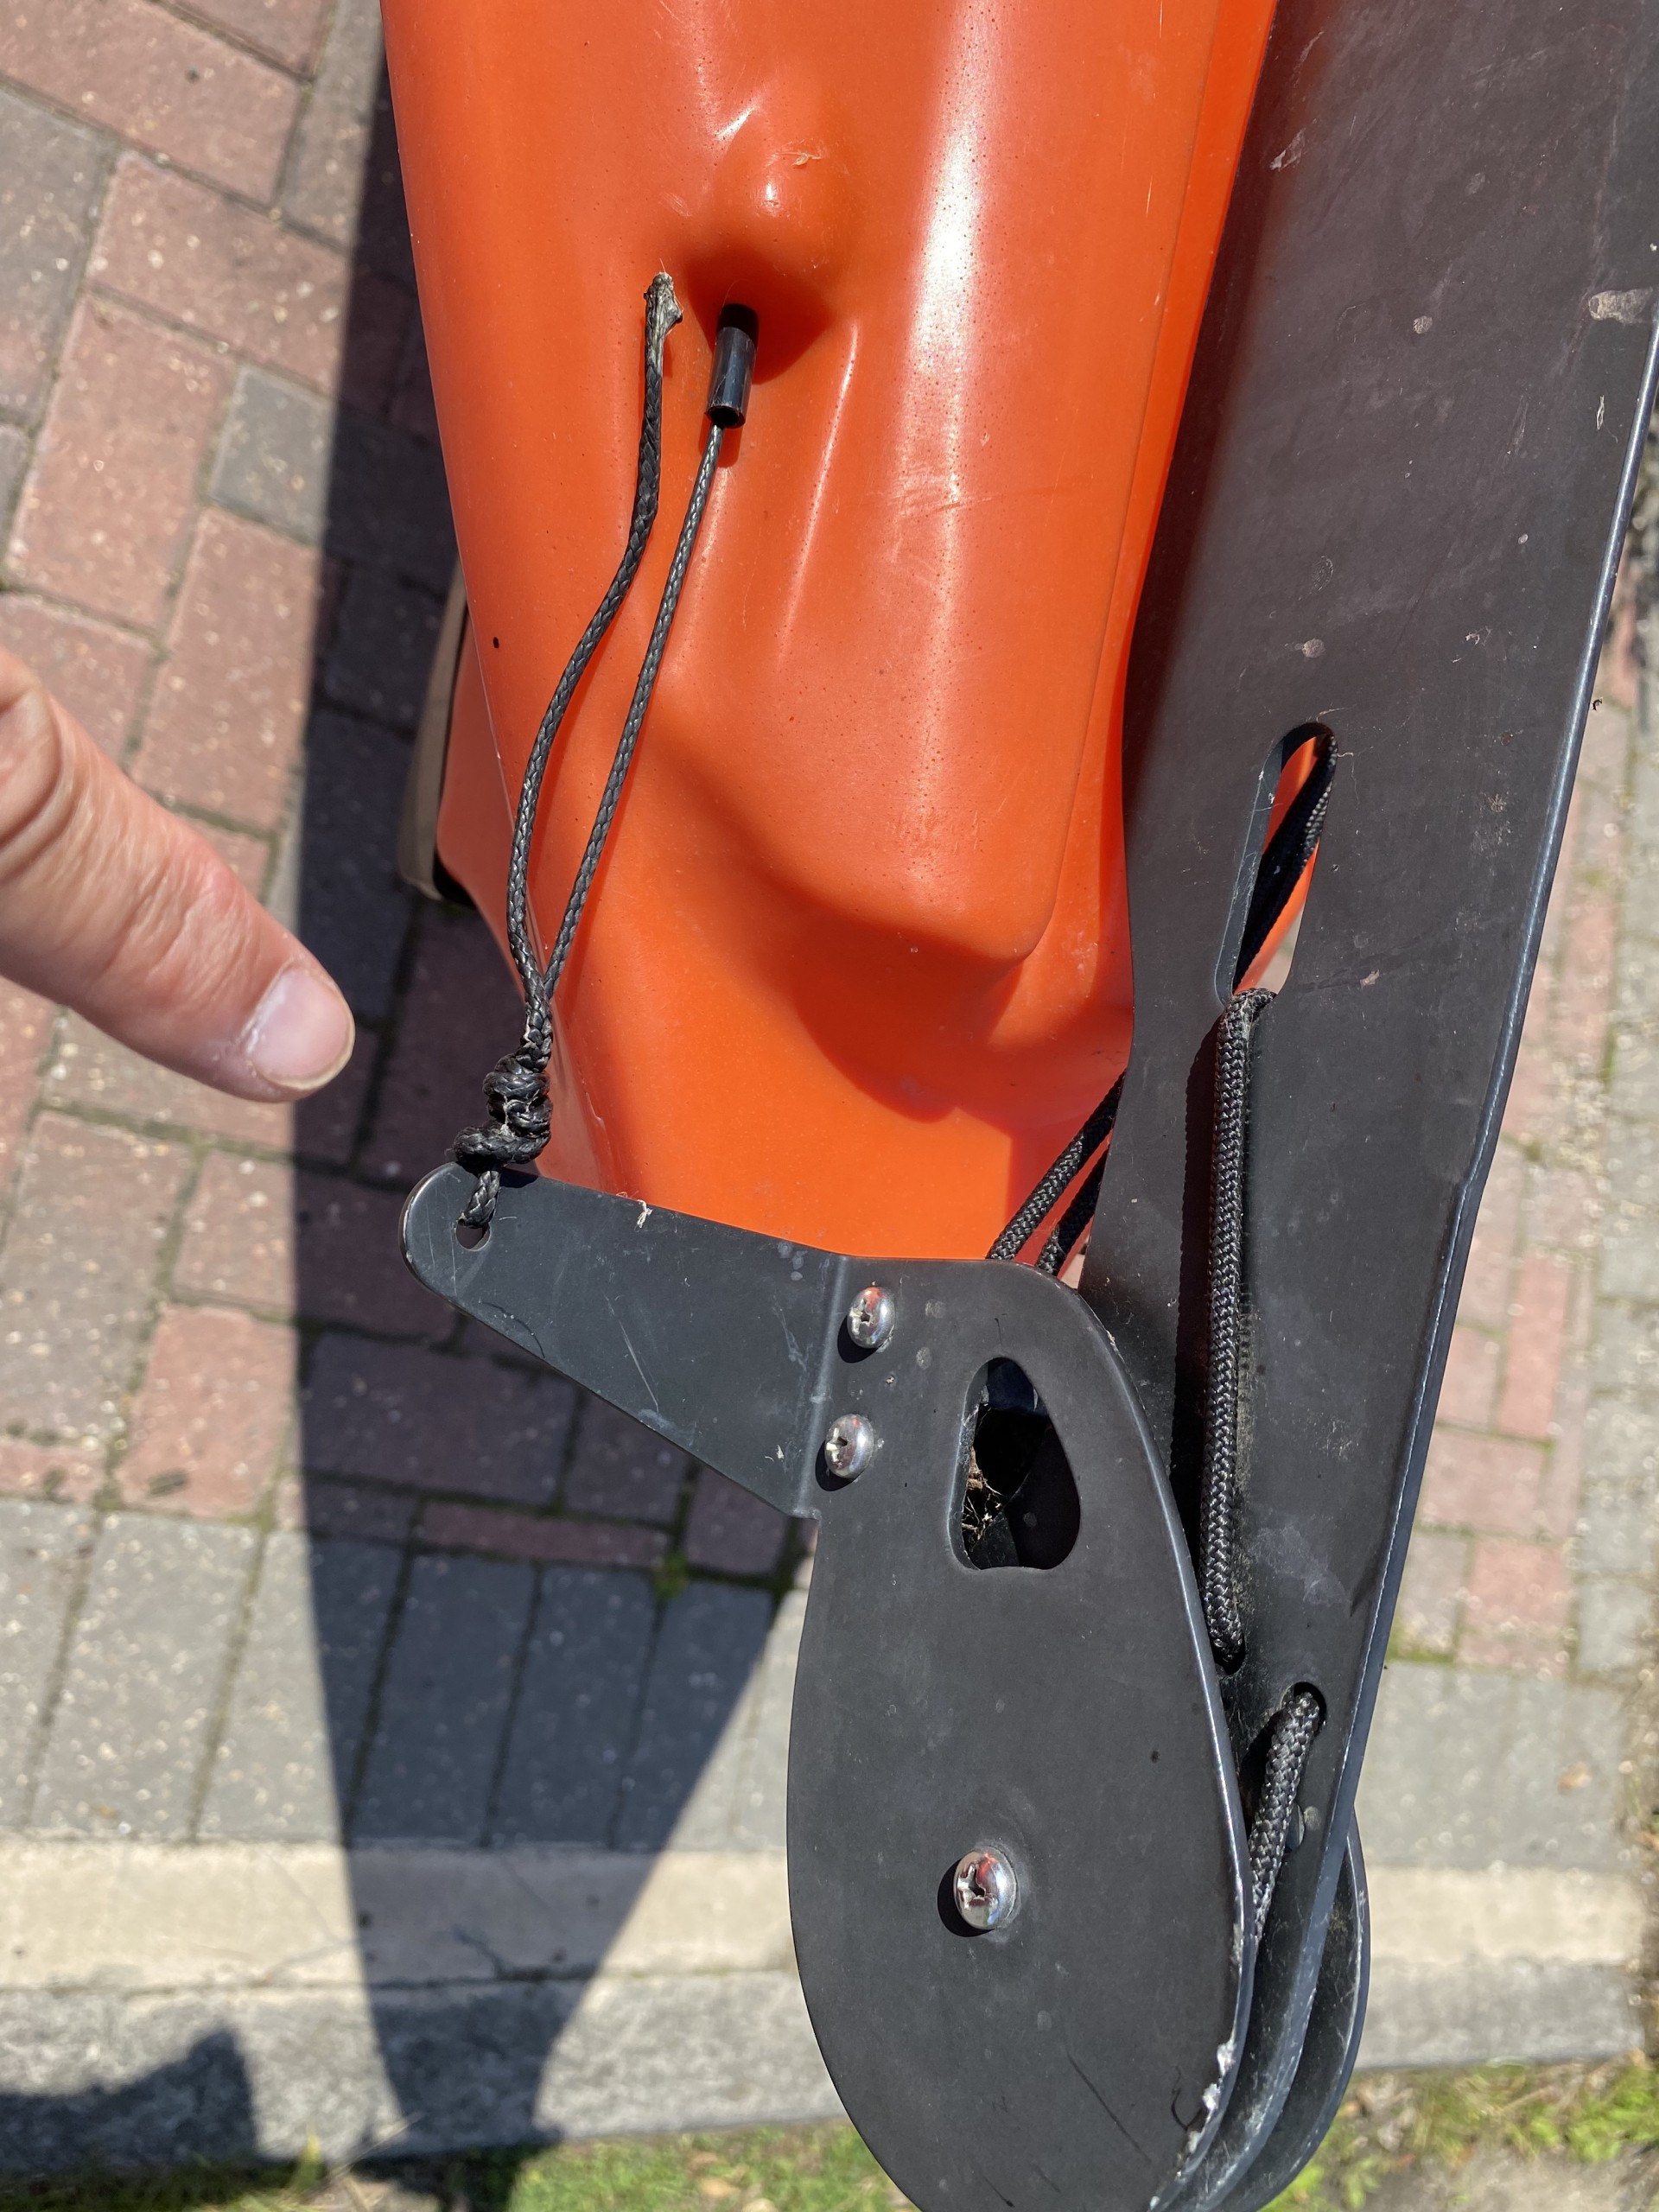 Sit-on-top kayak rudder with steering cable connected.